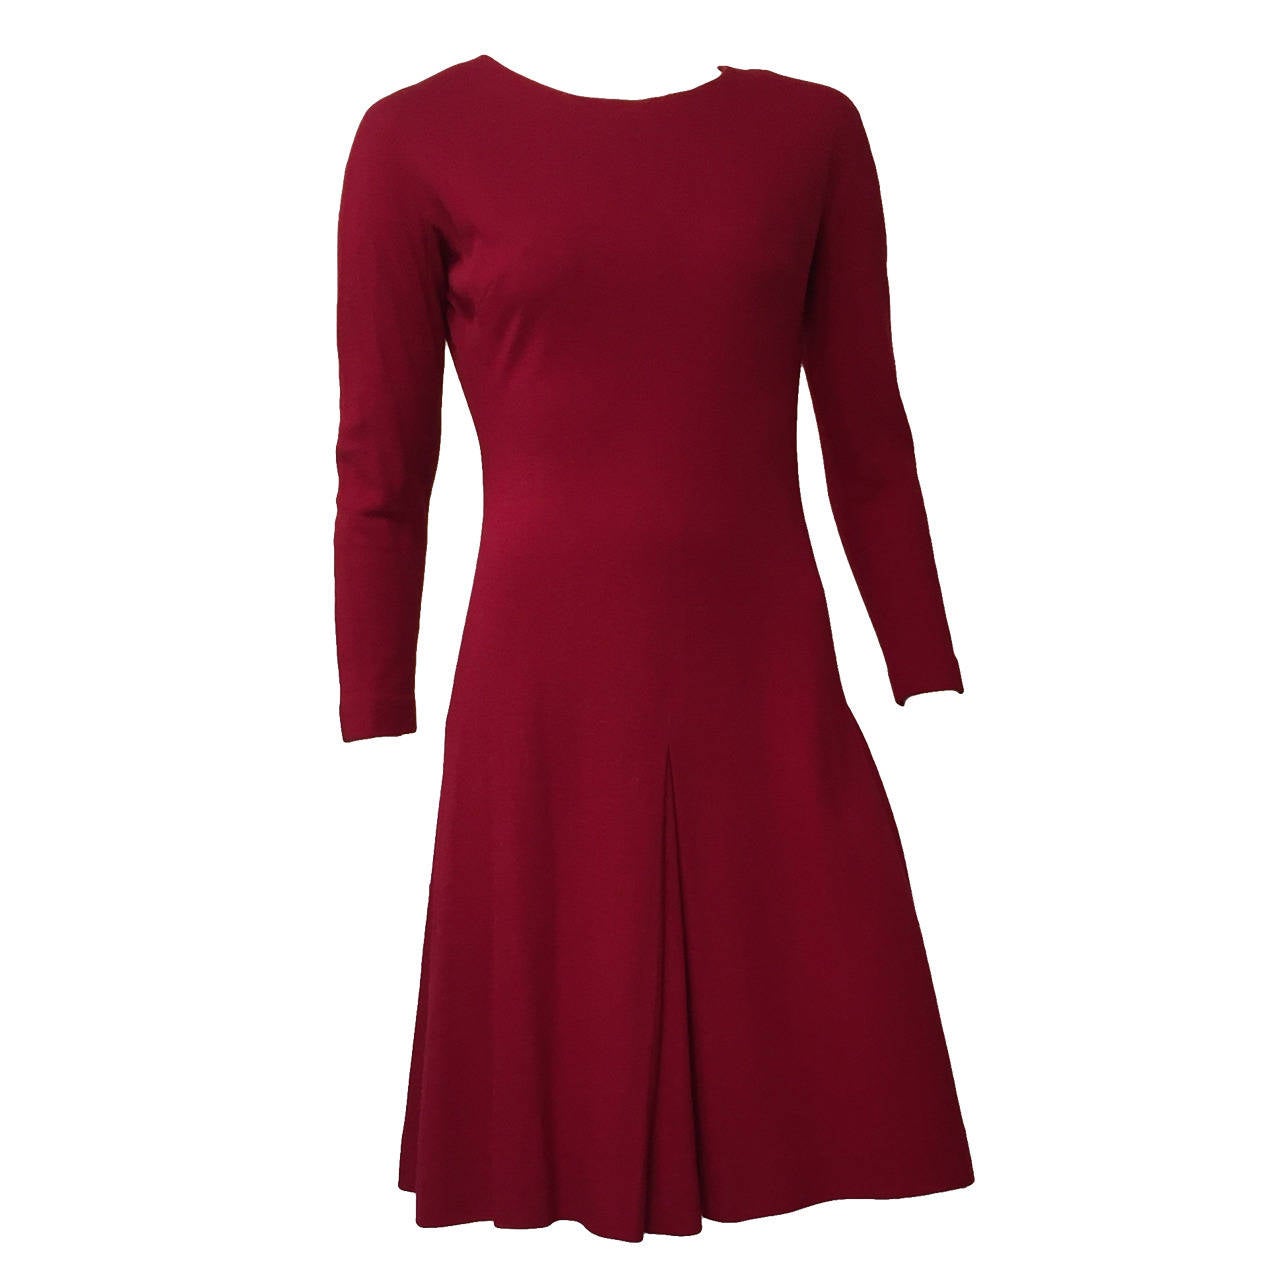 Anne Fogarty 60s Wool Dress Size 6. For Sale at 1stdibs